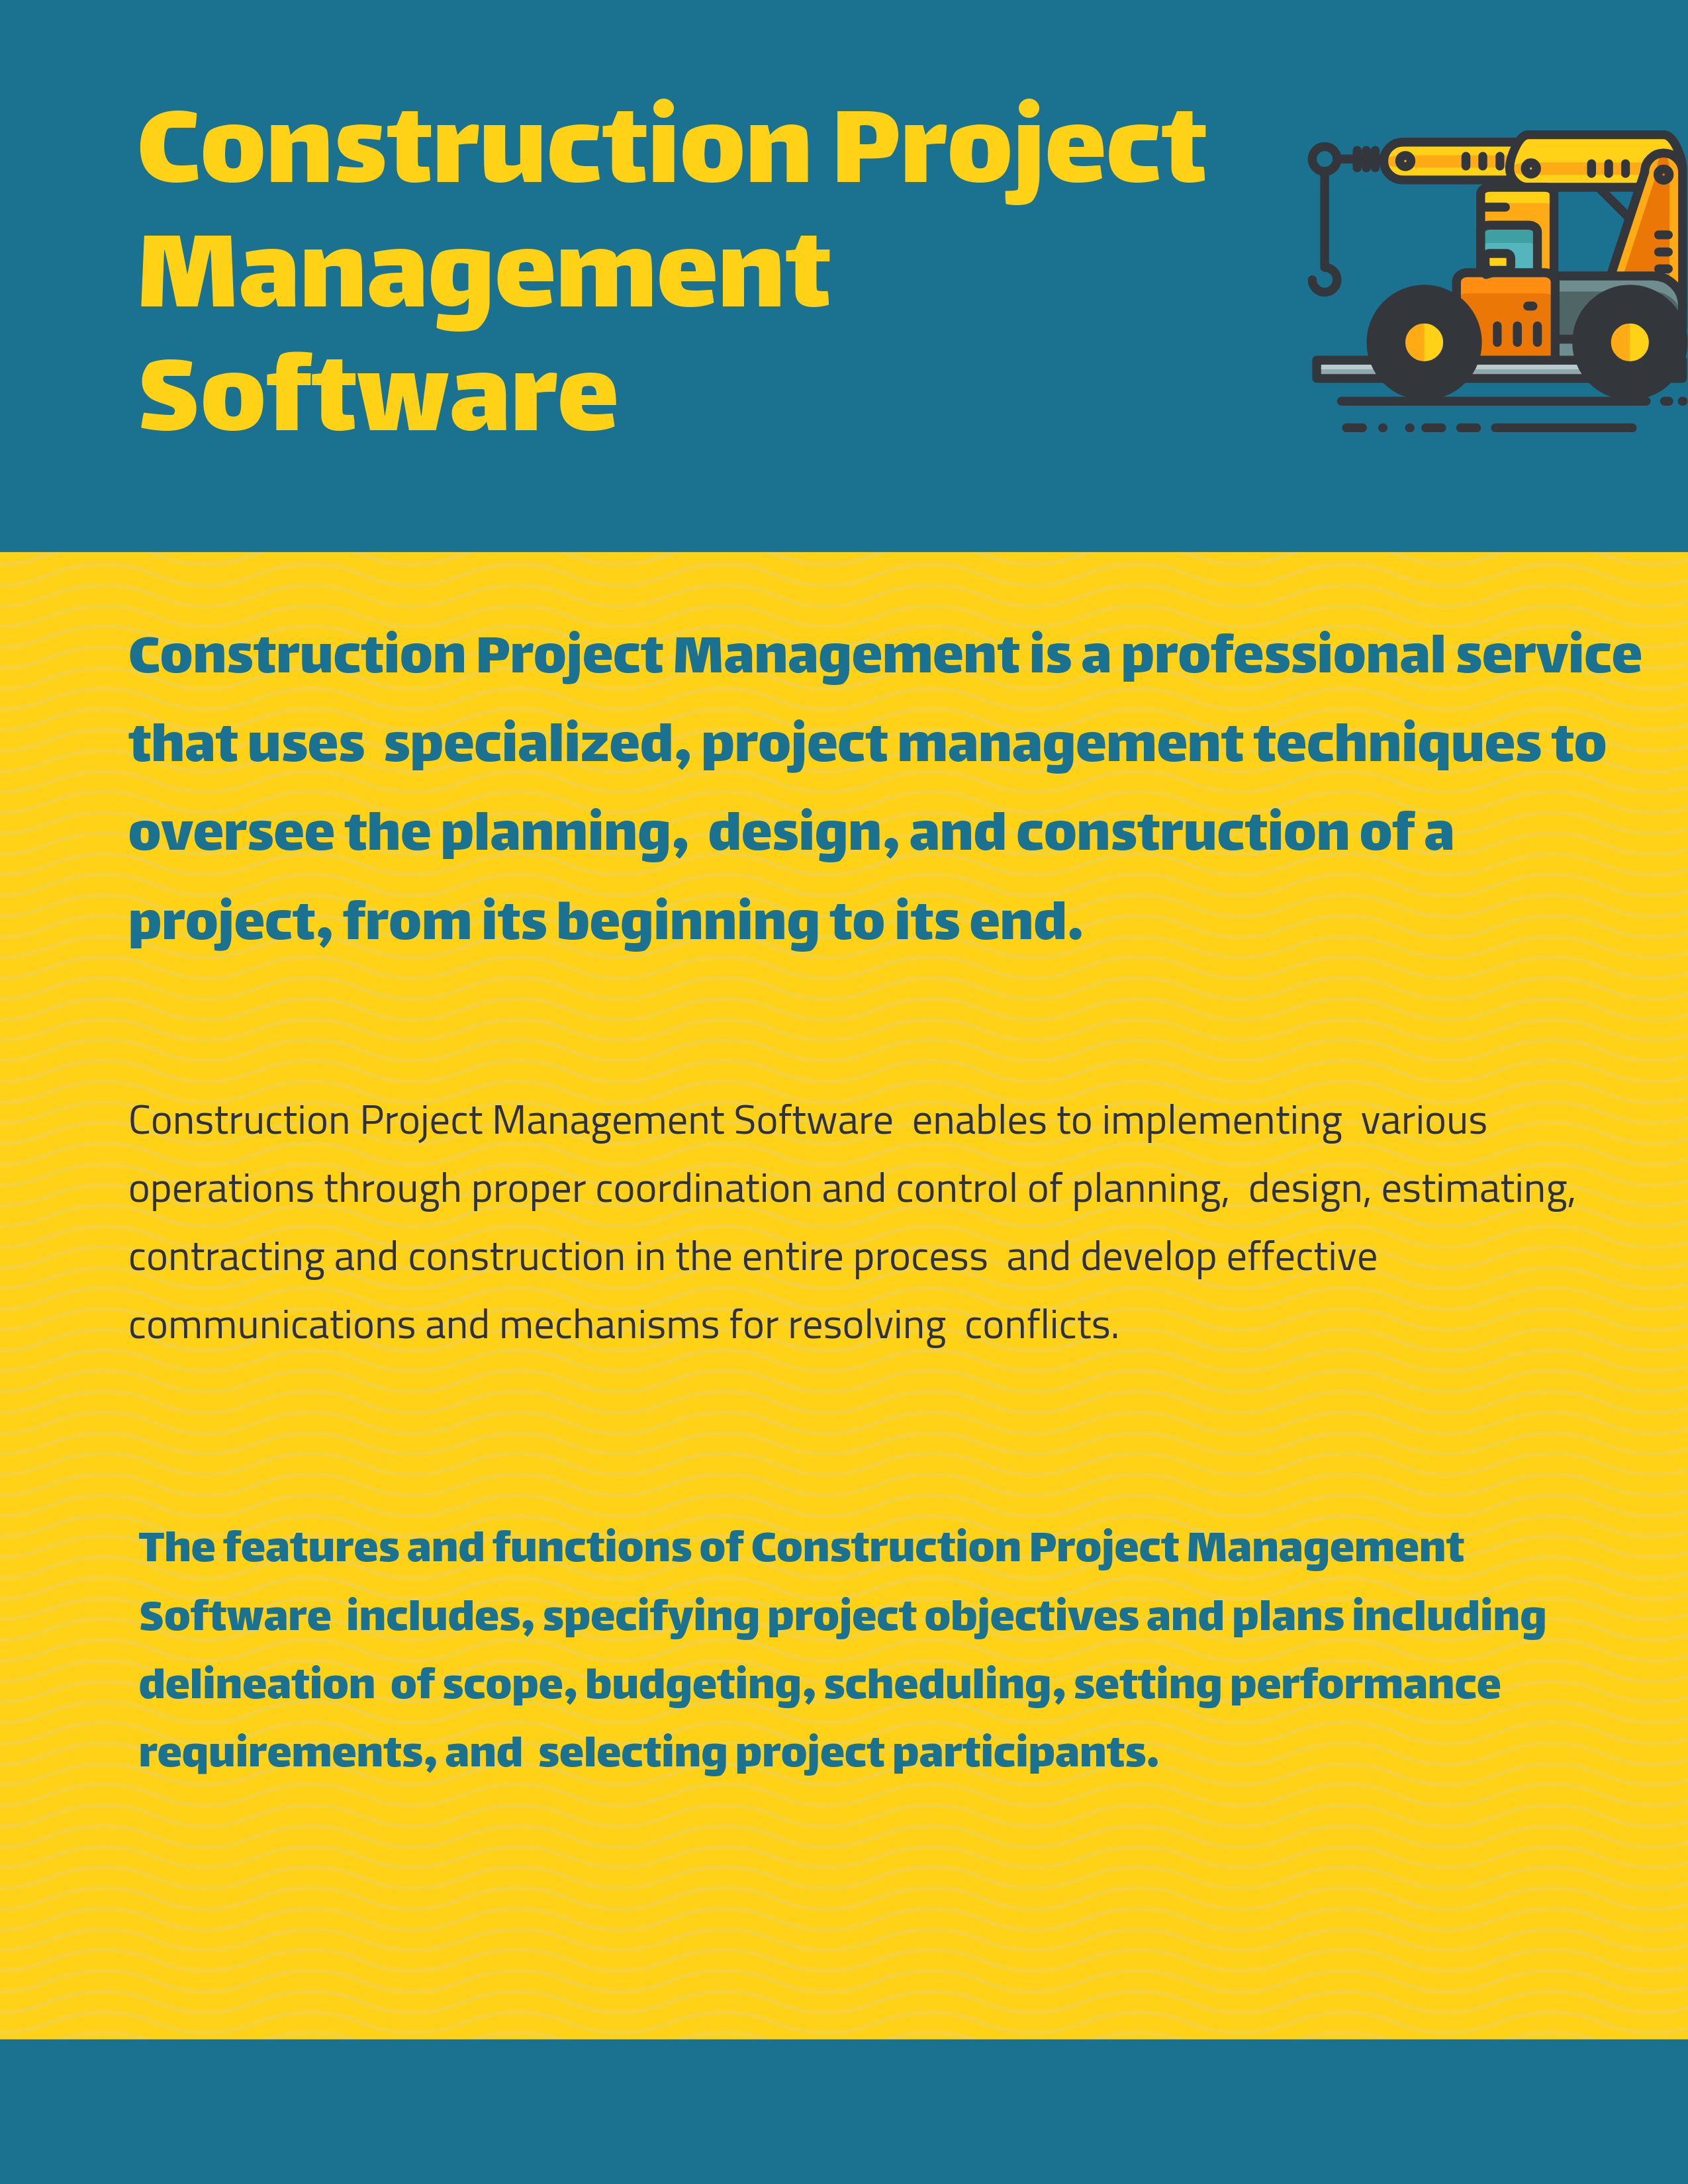 Estimating Computerized Management of Multiple Small Projects: Planning and Project Control Design Optimization Task and Resource Scheduling